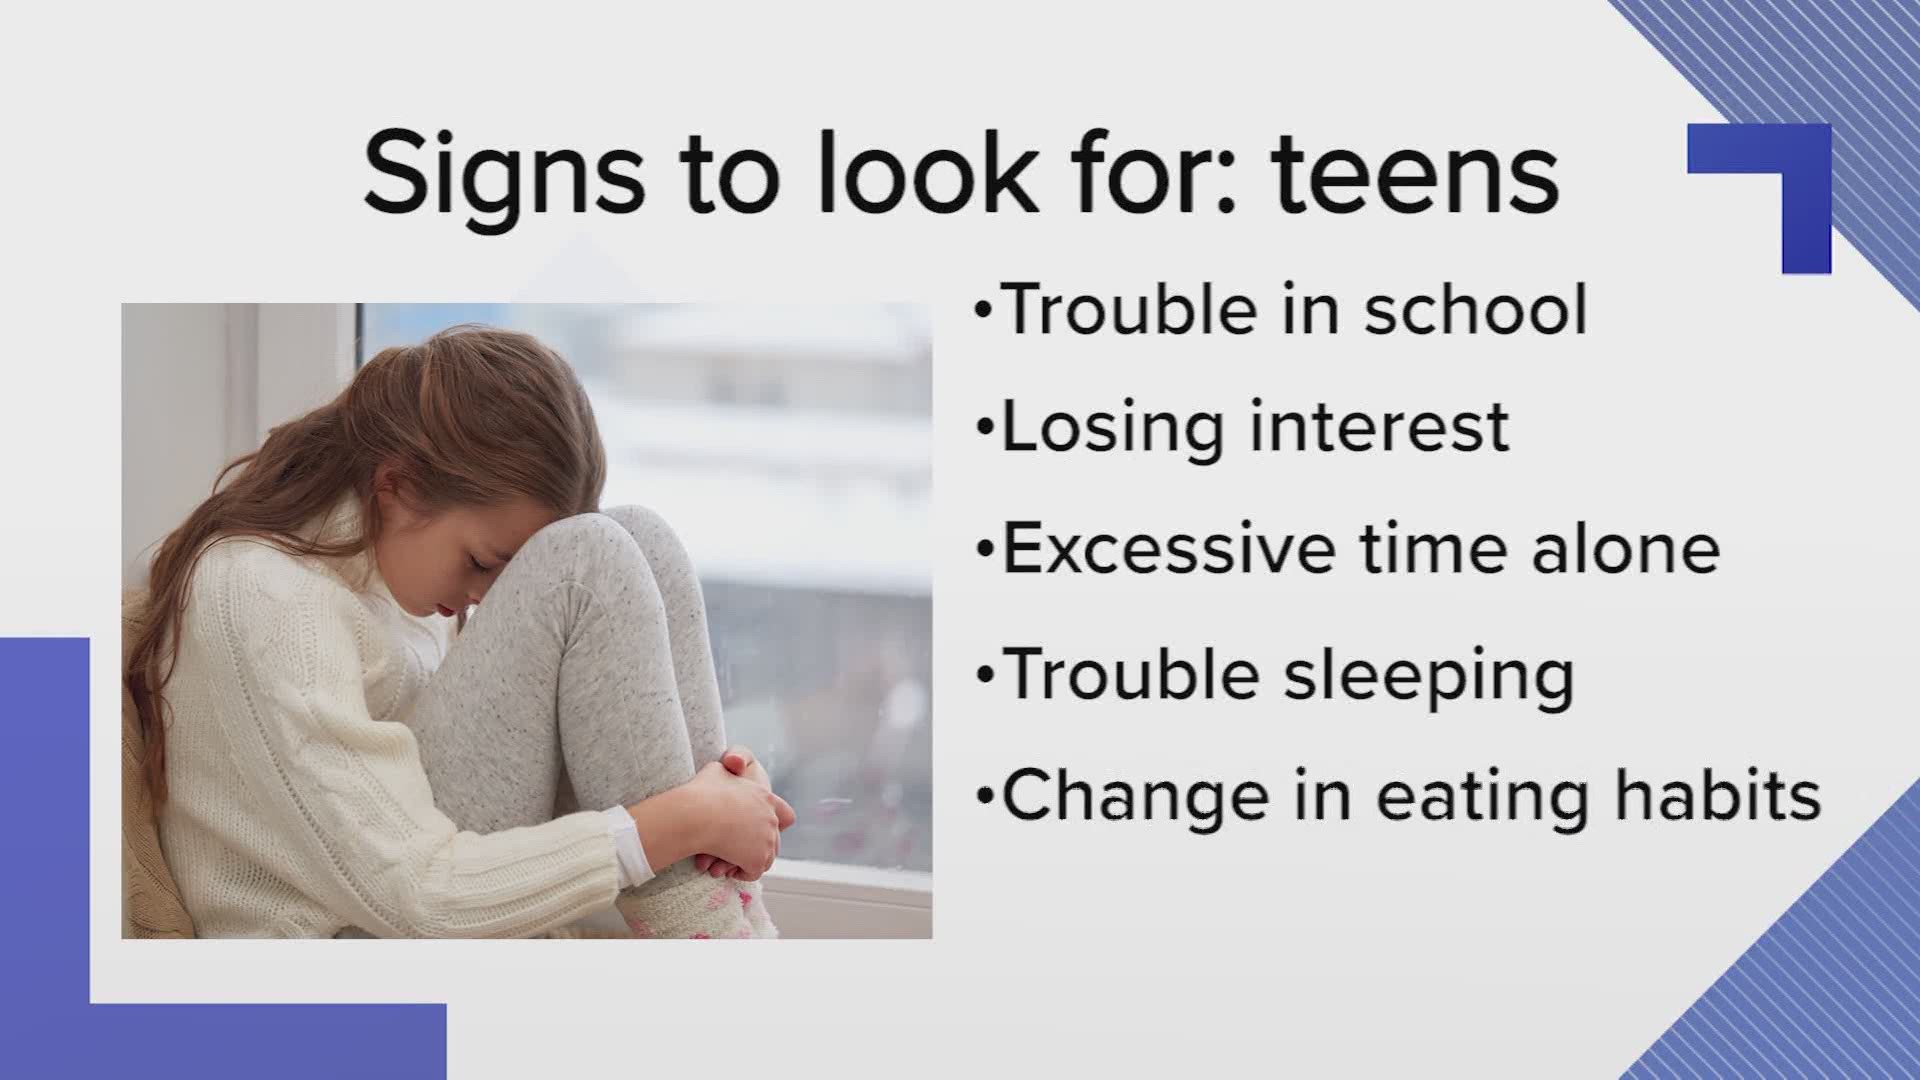 COVID-19 changed life so fast for everyone that a little unrest is expected. But with teens and kids, what's "normal" and when should you seek professional help?